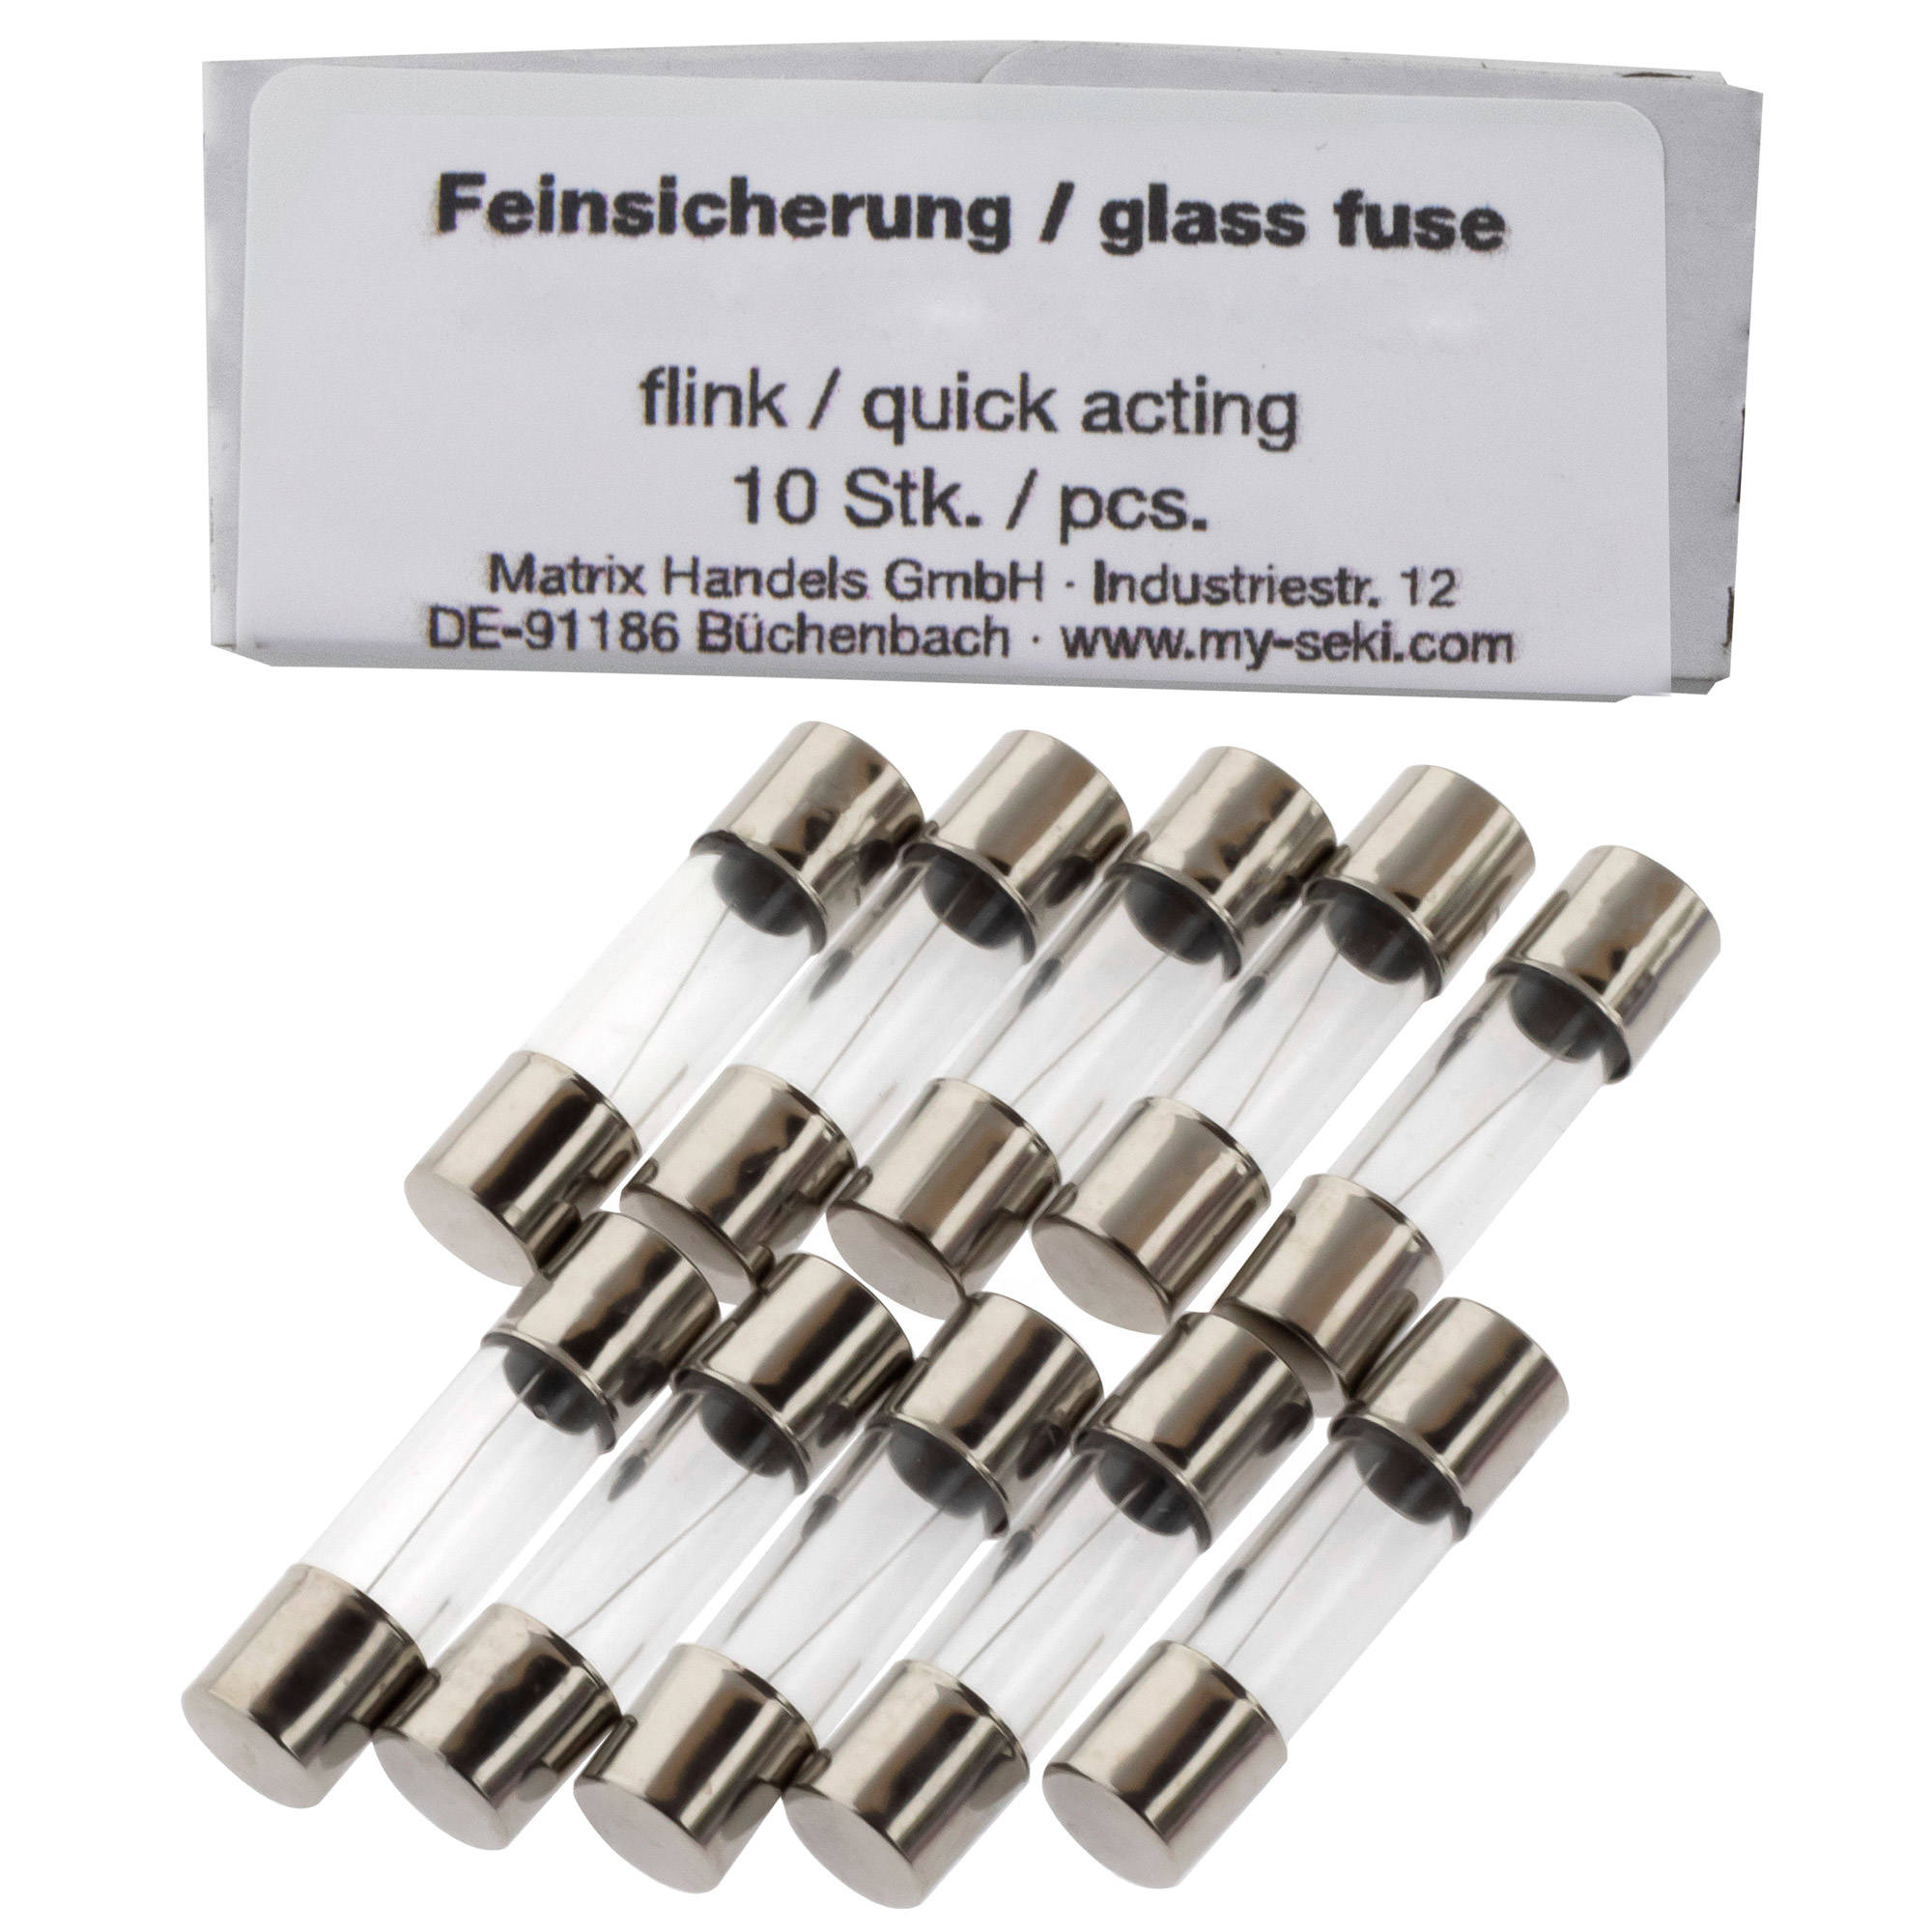 Micro Fuse 15,0A, 5x20mm, quick acting